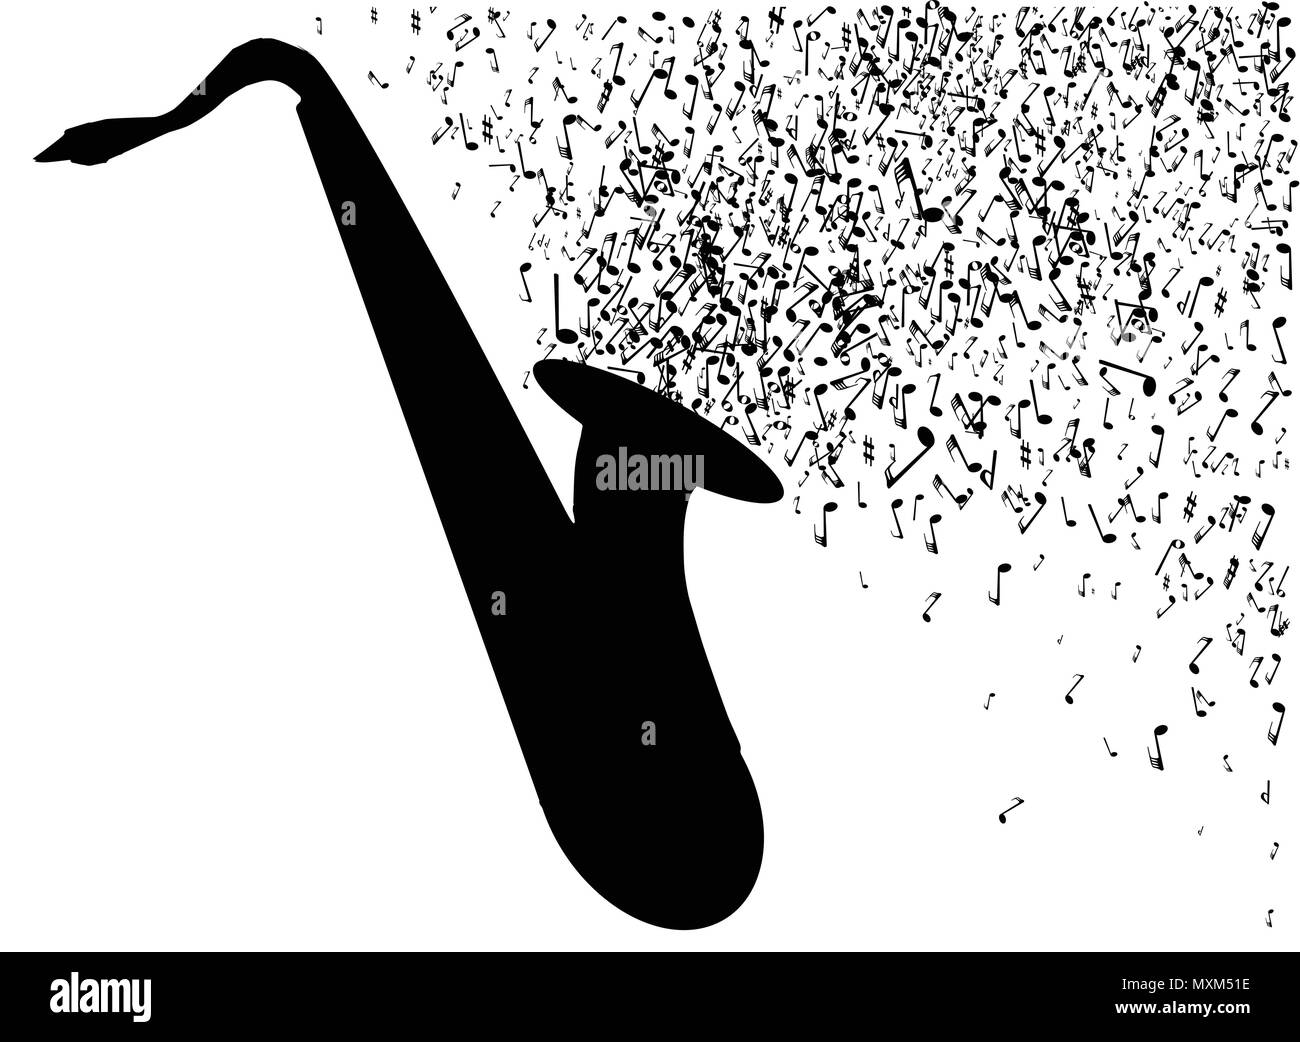 Silhouette of a saxophone with several black musical notes and icons pouring out all over a white background Stock Vector